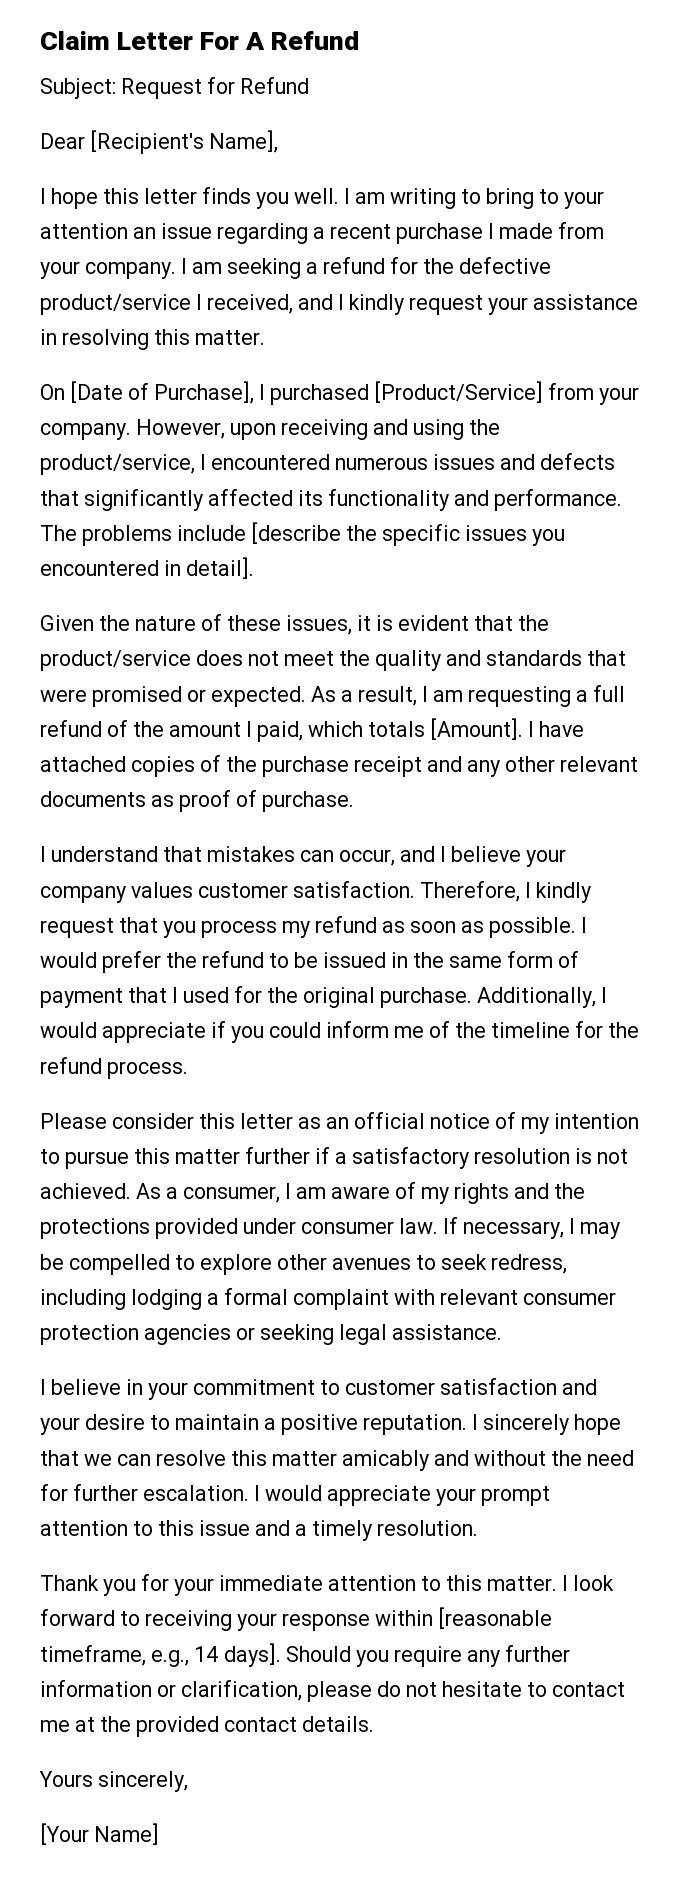 Claim Letter For A Refund